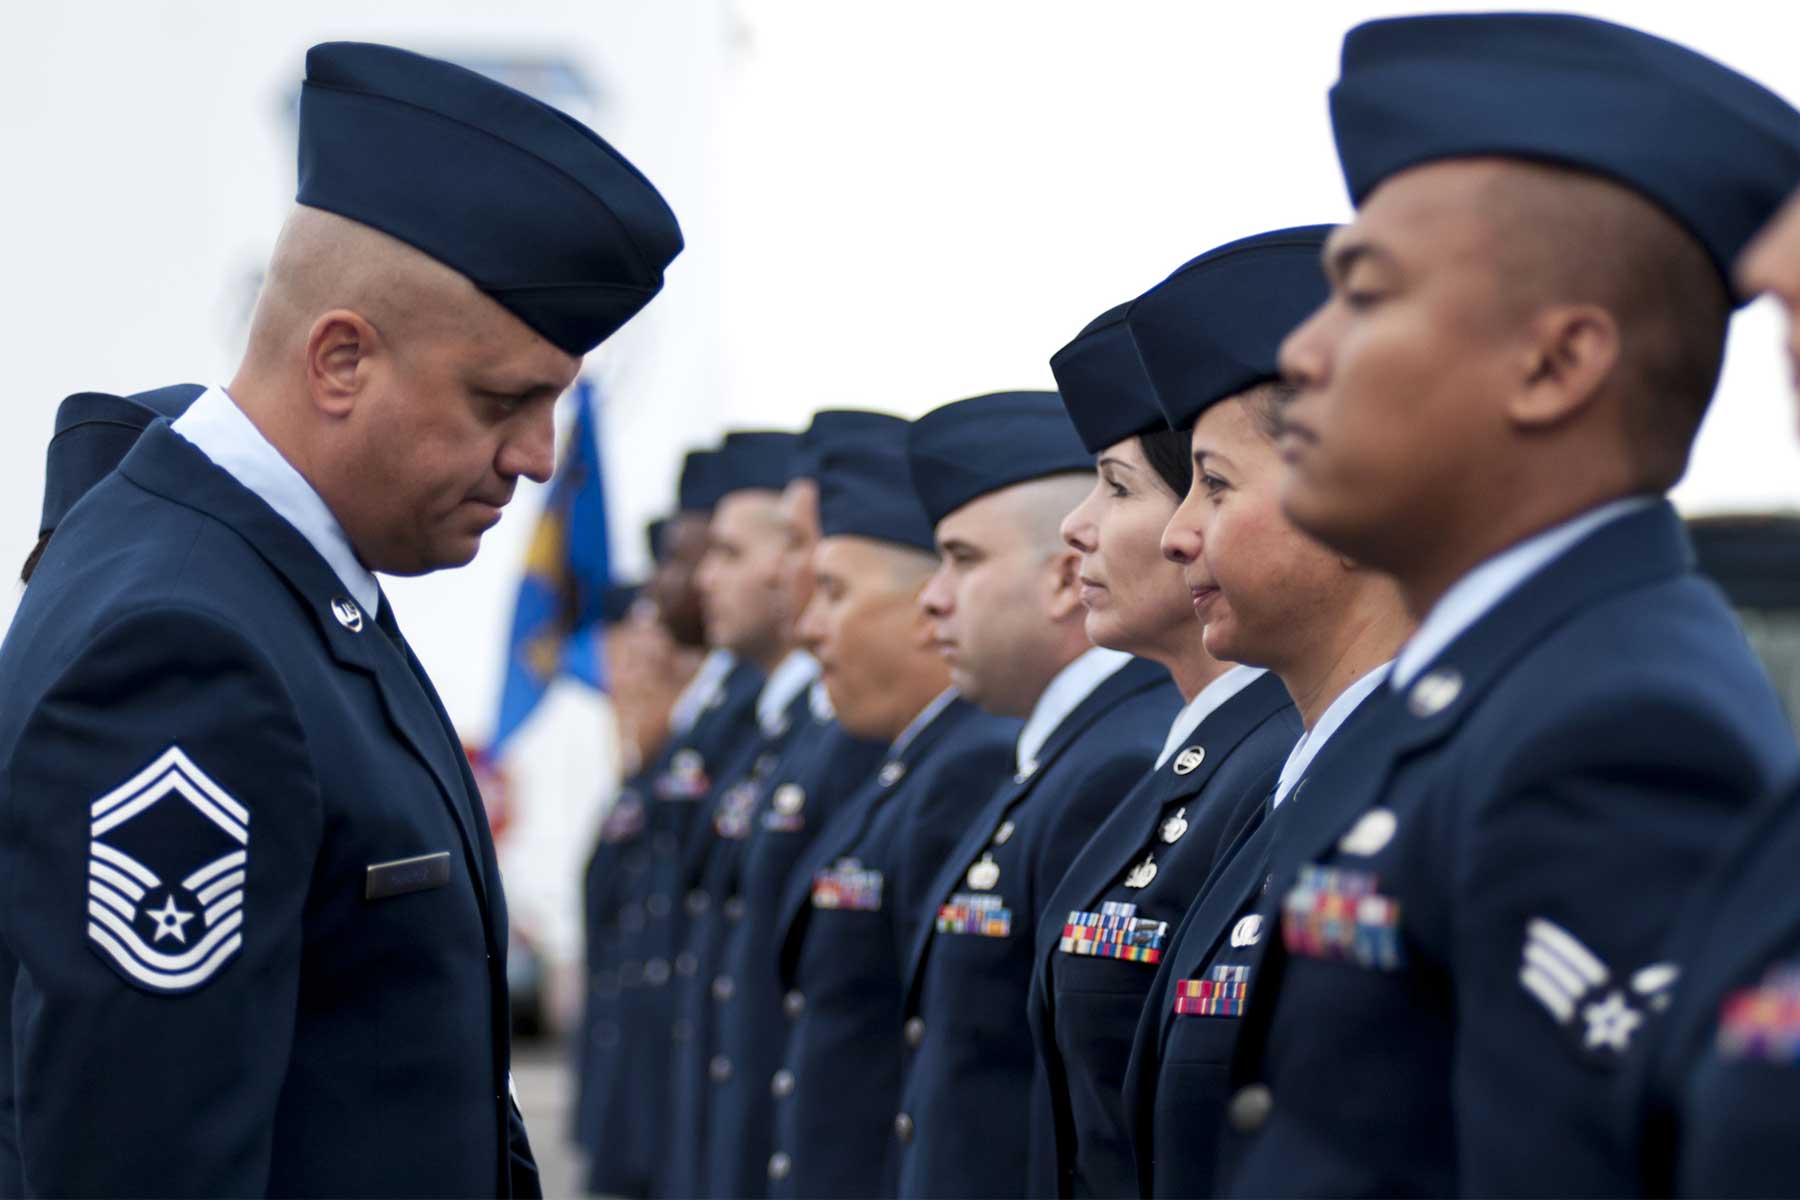 Preservative Long bird History of US Air Force Uniforms | Military.com